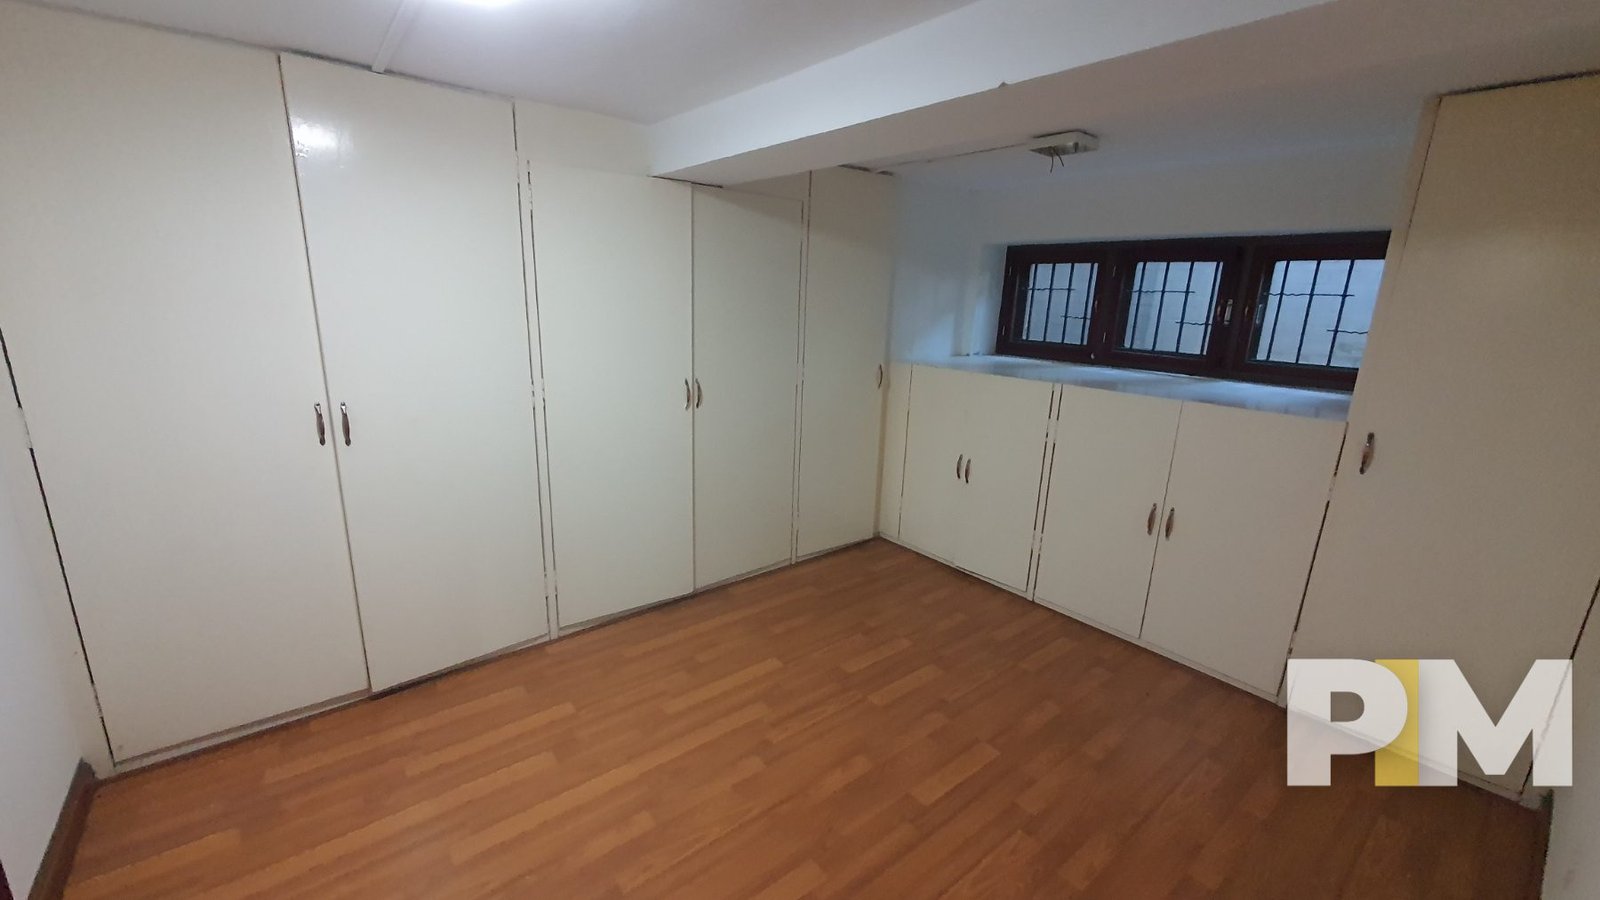 room with cabinets - Myanmar Property